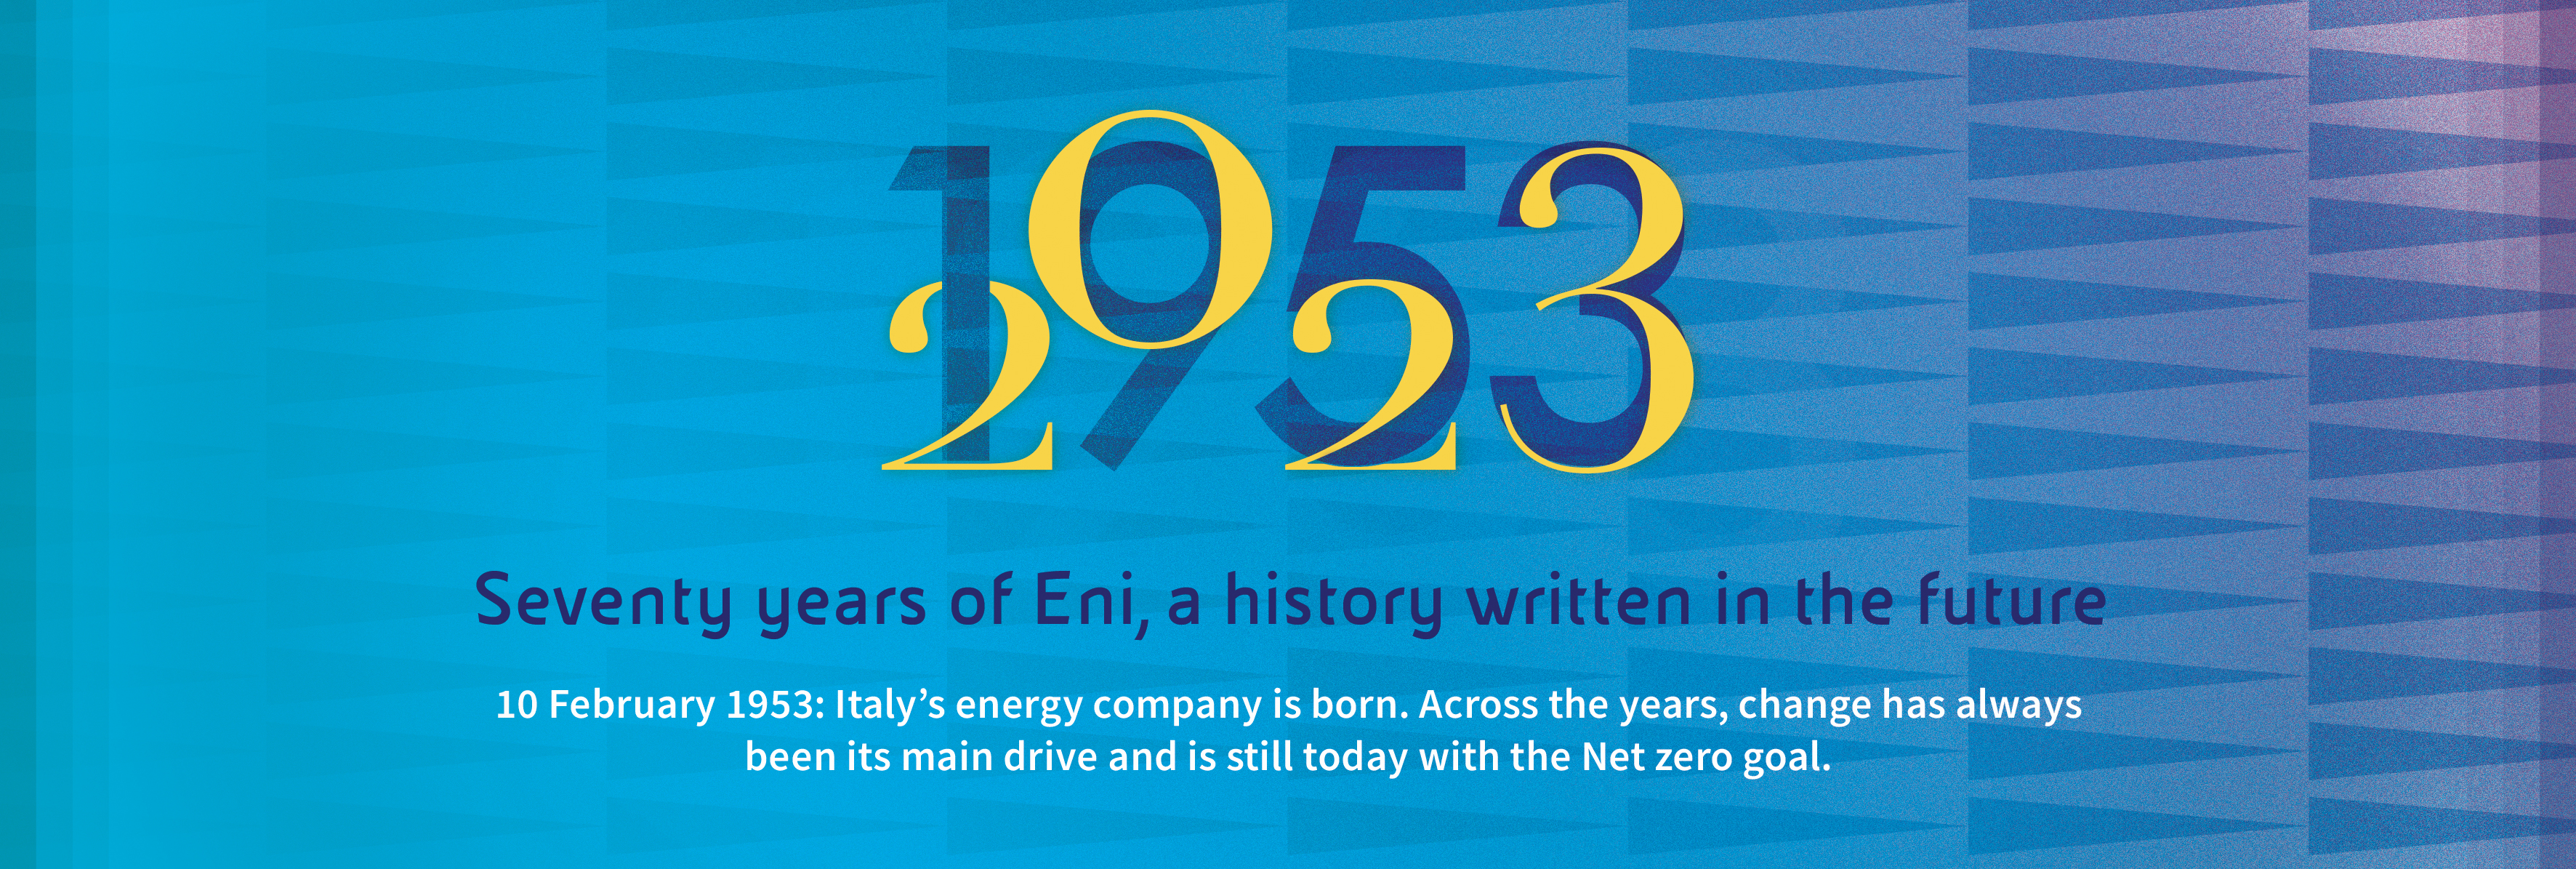 Eni_70Anni_cover-page-eng.jpg